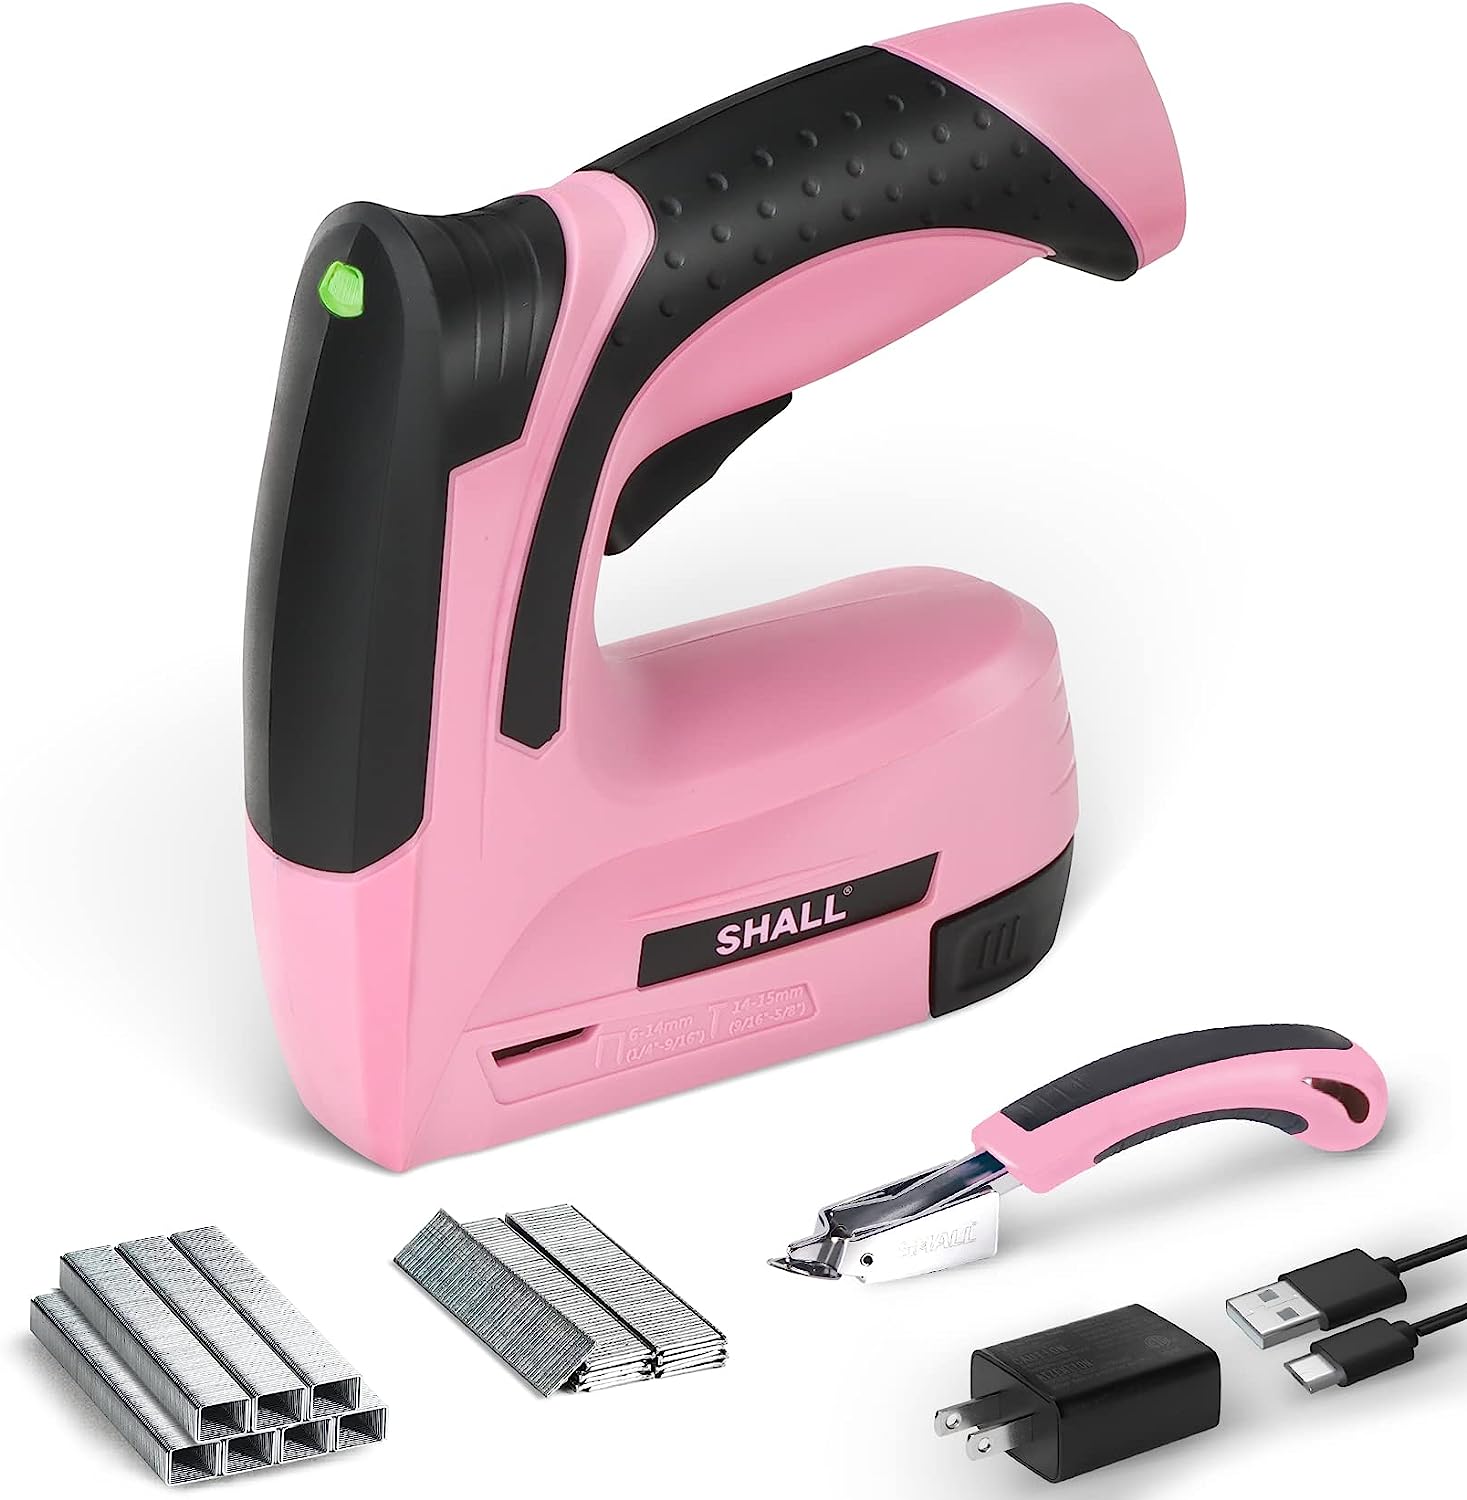 beyond by BLACK+DECKER BDHT70004 Heavy-Duty Stapler with Wire Guide/ Brad  Nailer Kit